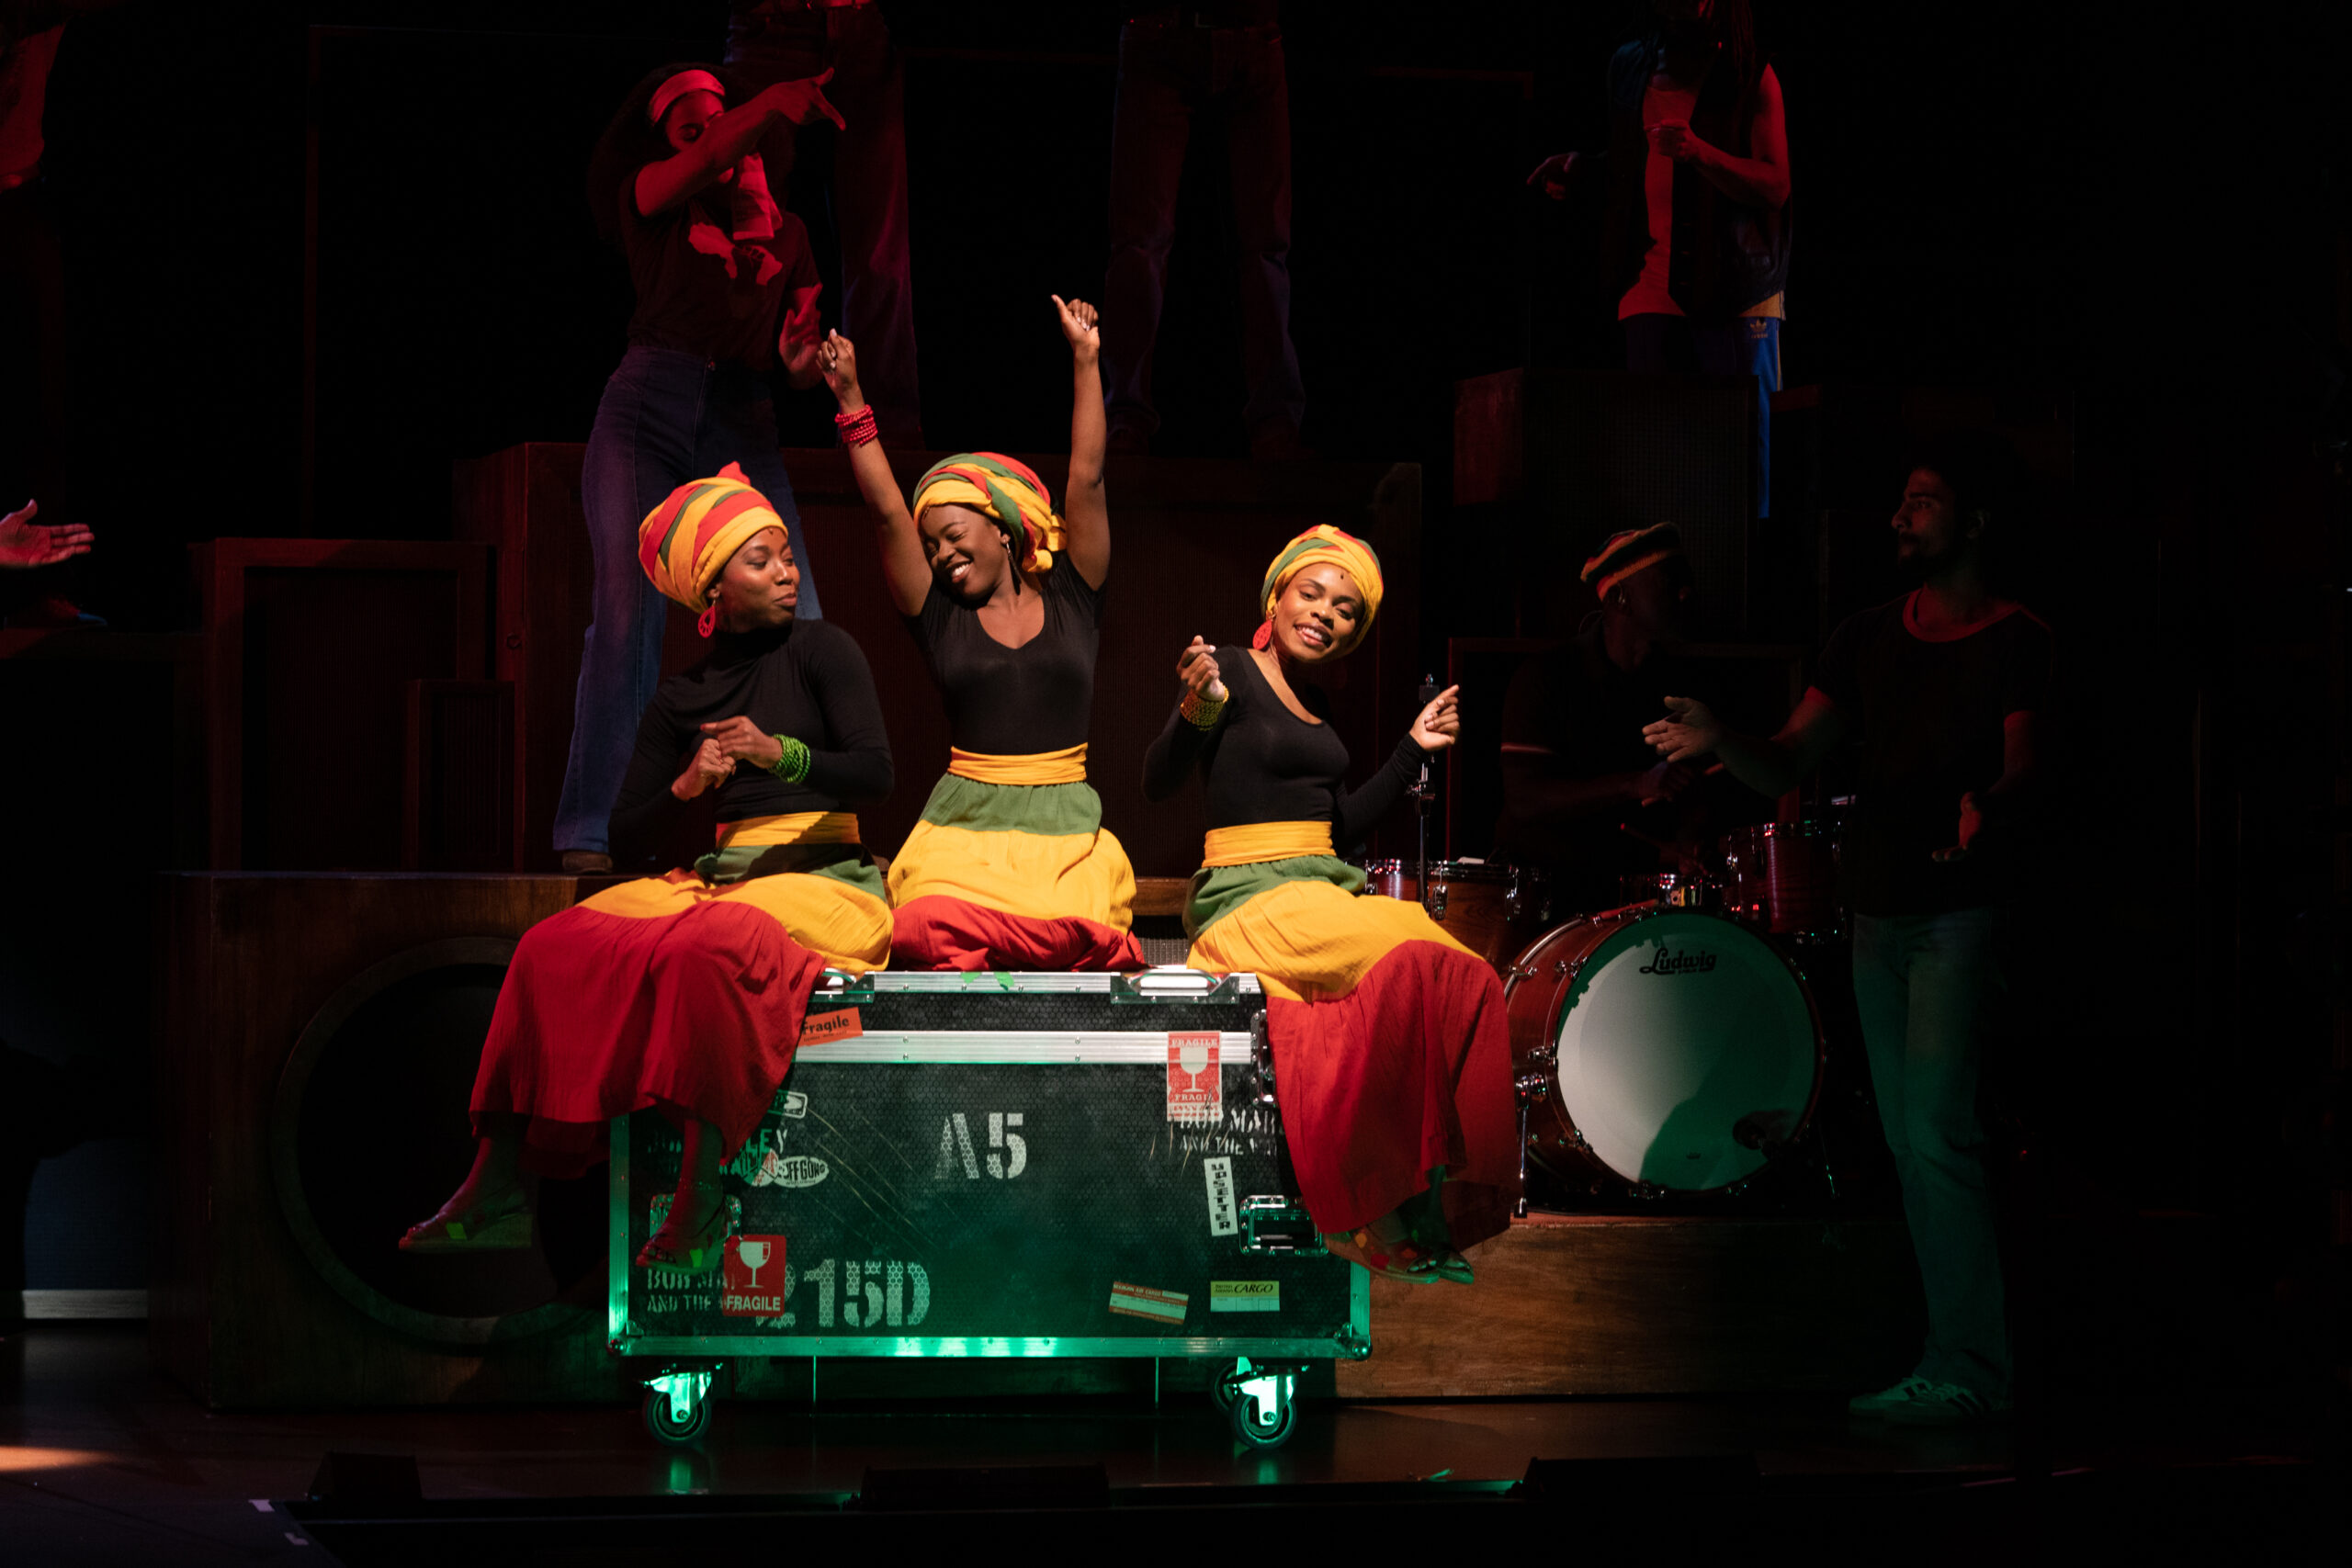 Get Up, Stand Up! brings Bob Marley’s complex life to stage in electrifying colour